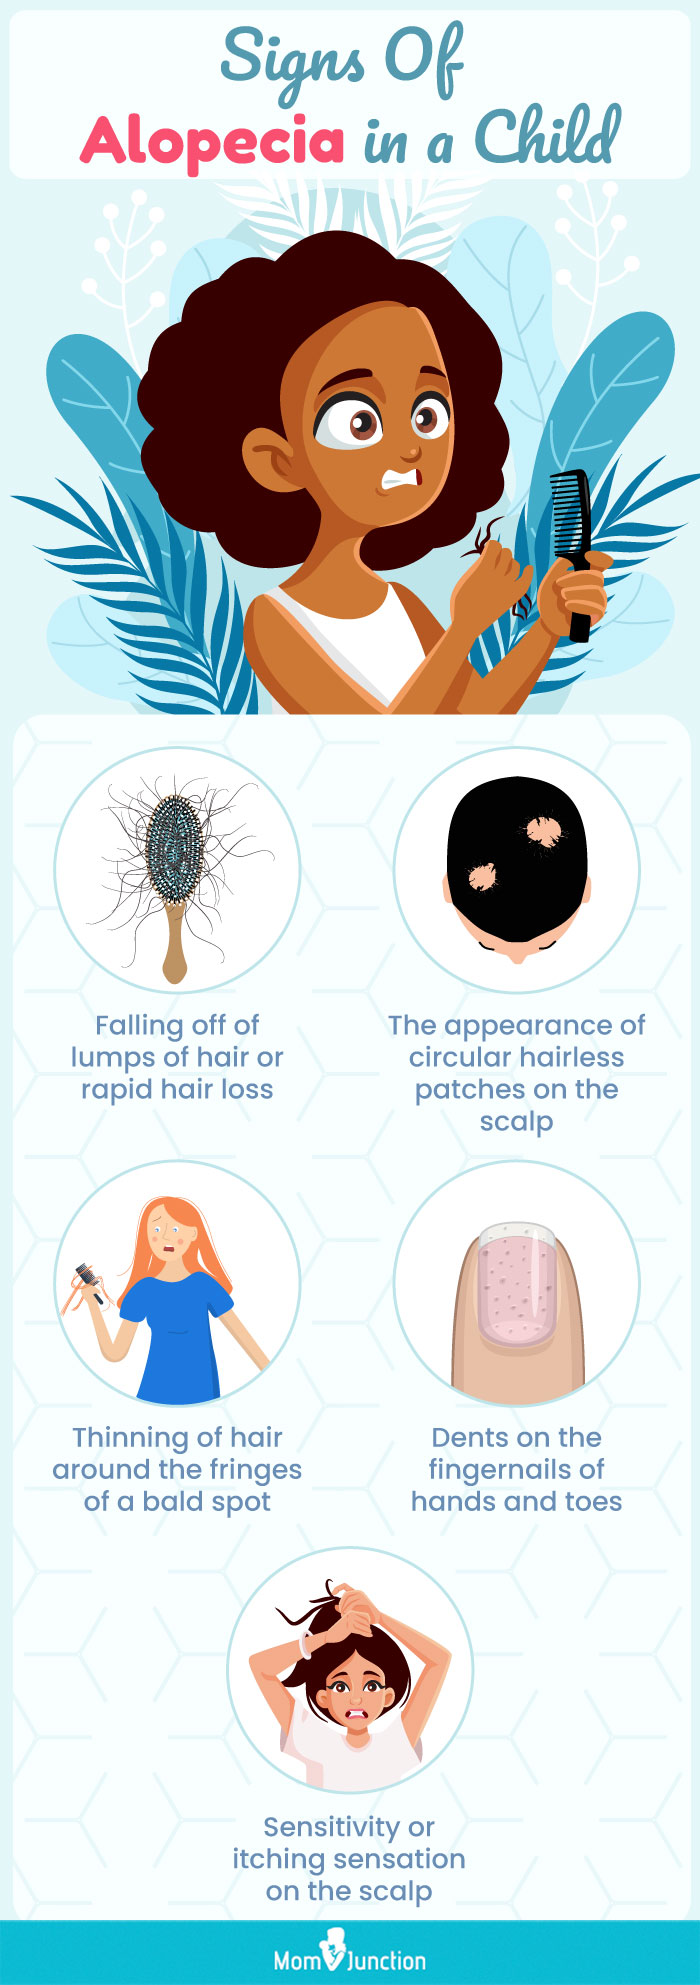 signs-of-alopecia-in-a-child [infographic]